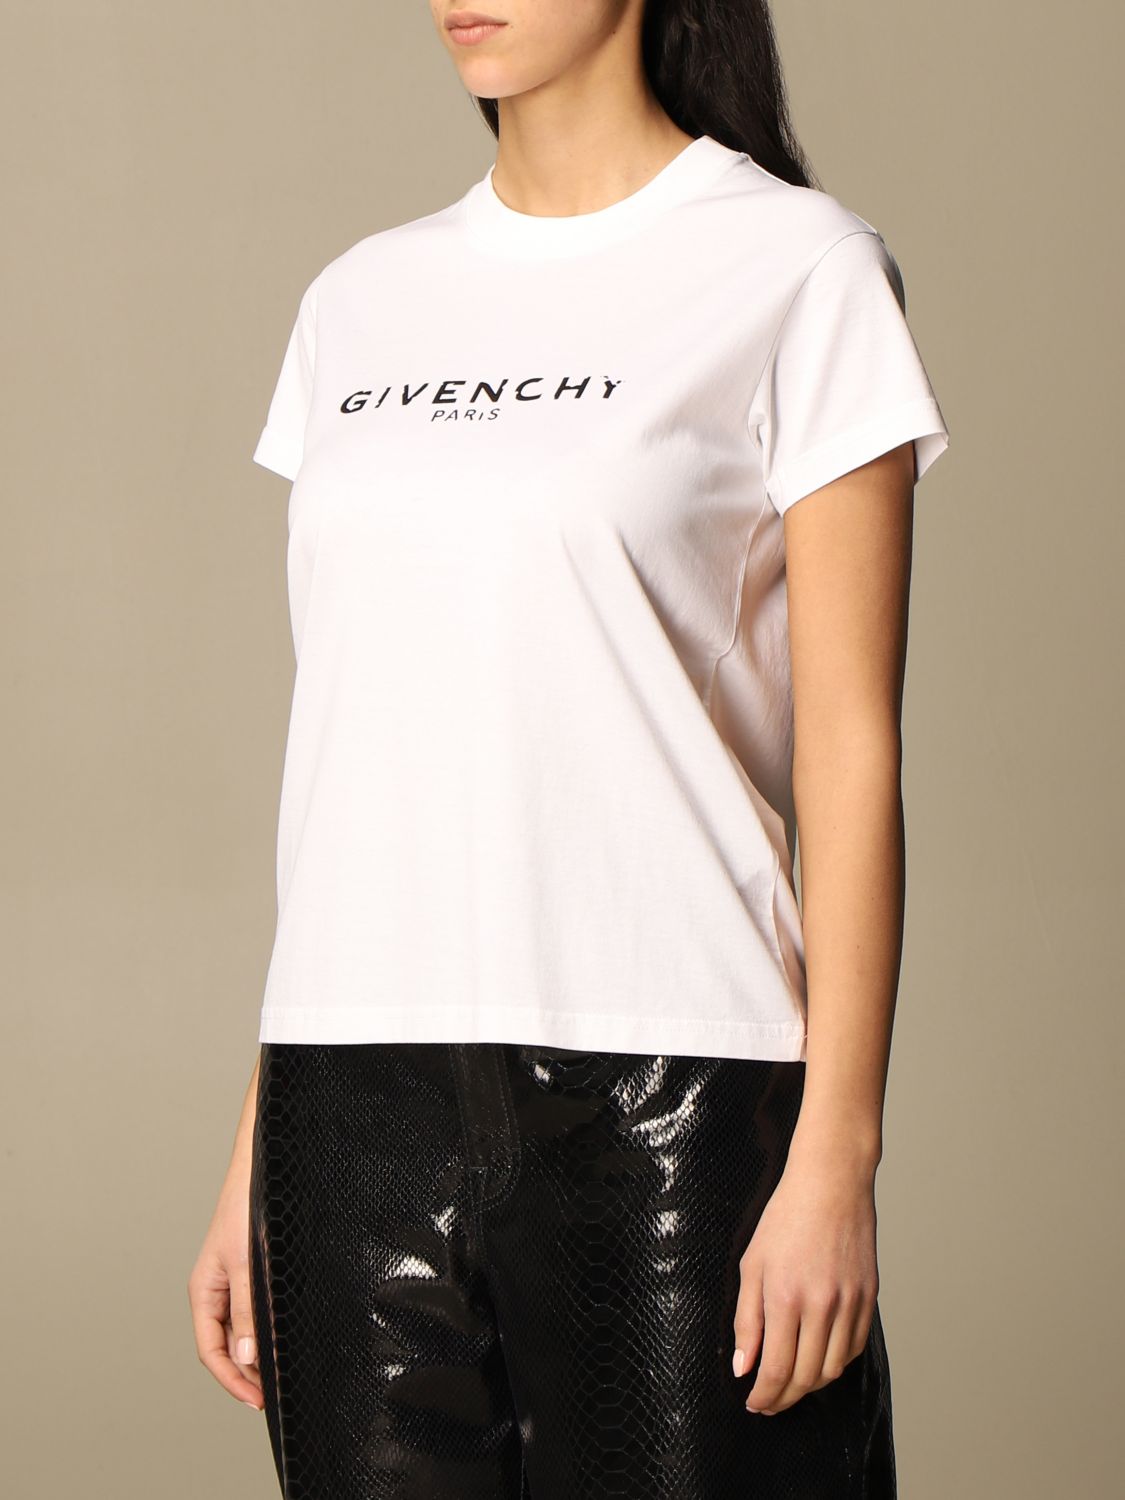 GIVENCHY: cotton t-shirt with logo - White | T-Shirt Givenchy ...